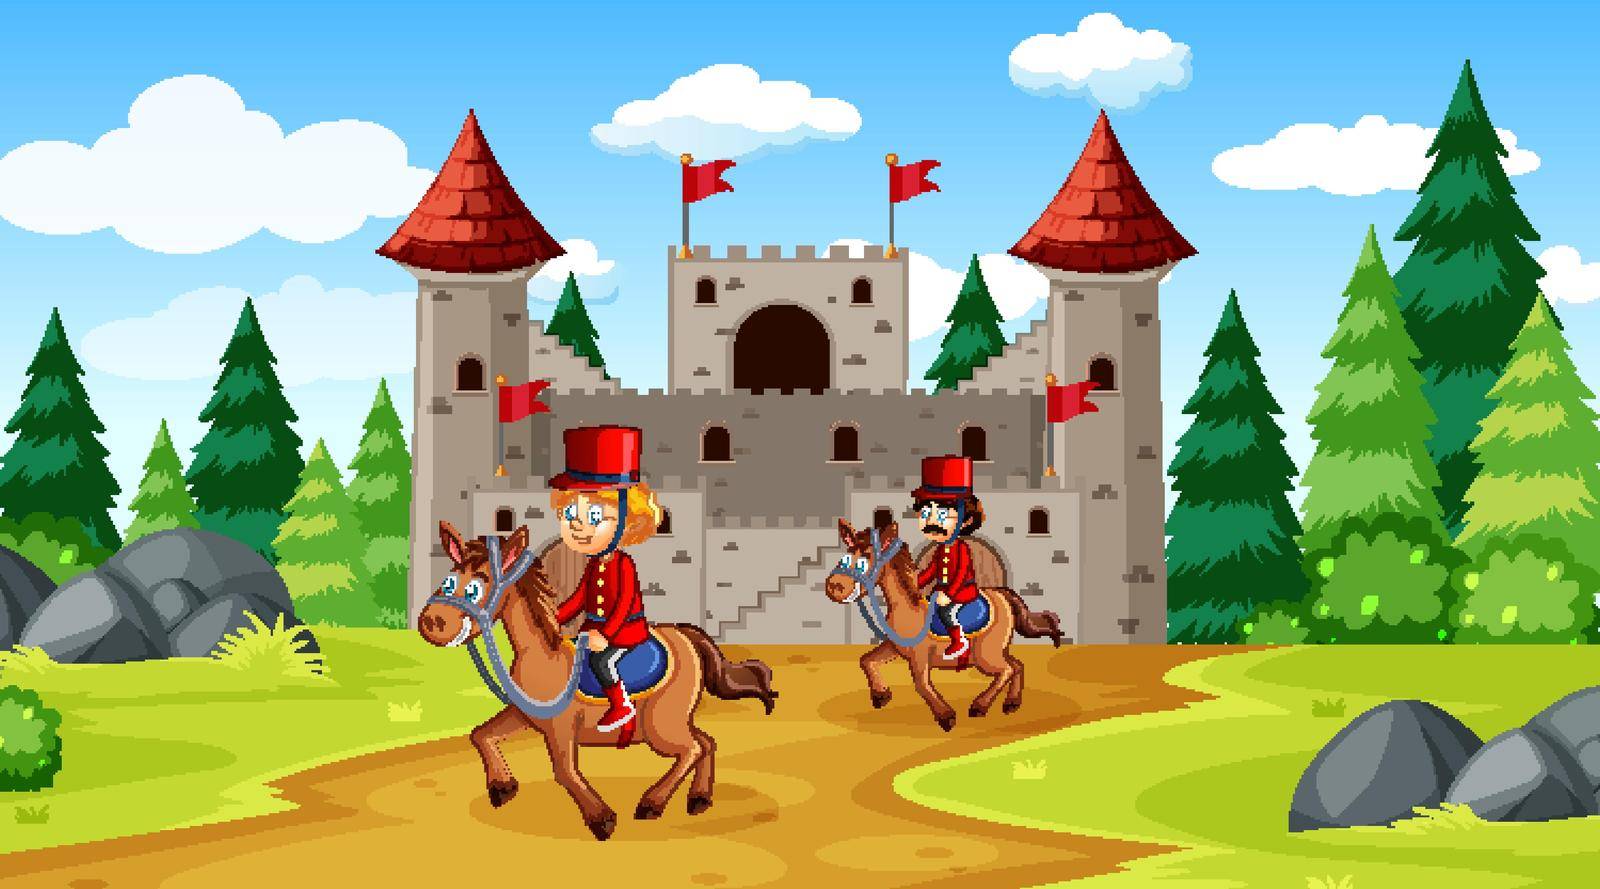 Fairytale scene with castle and soldier royal guard scene by iimages